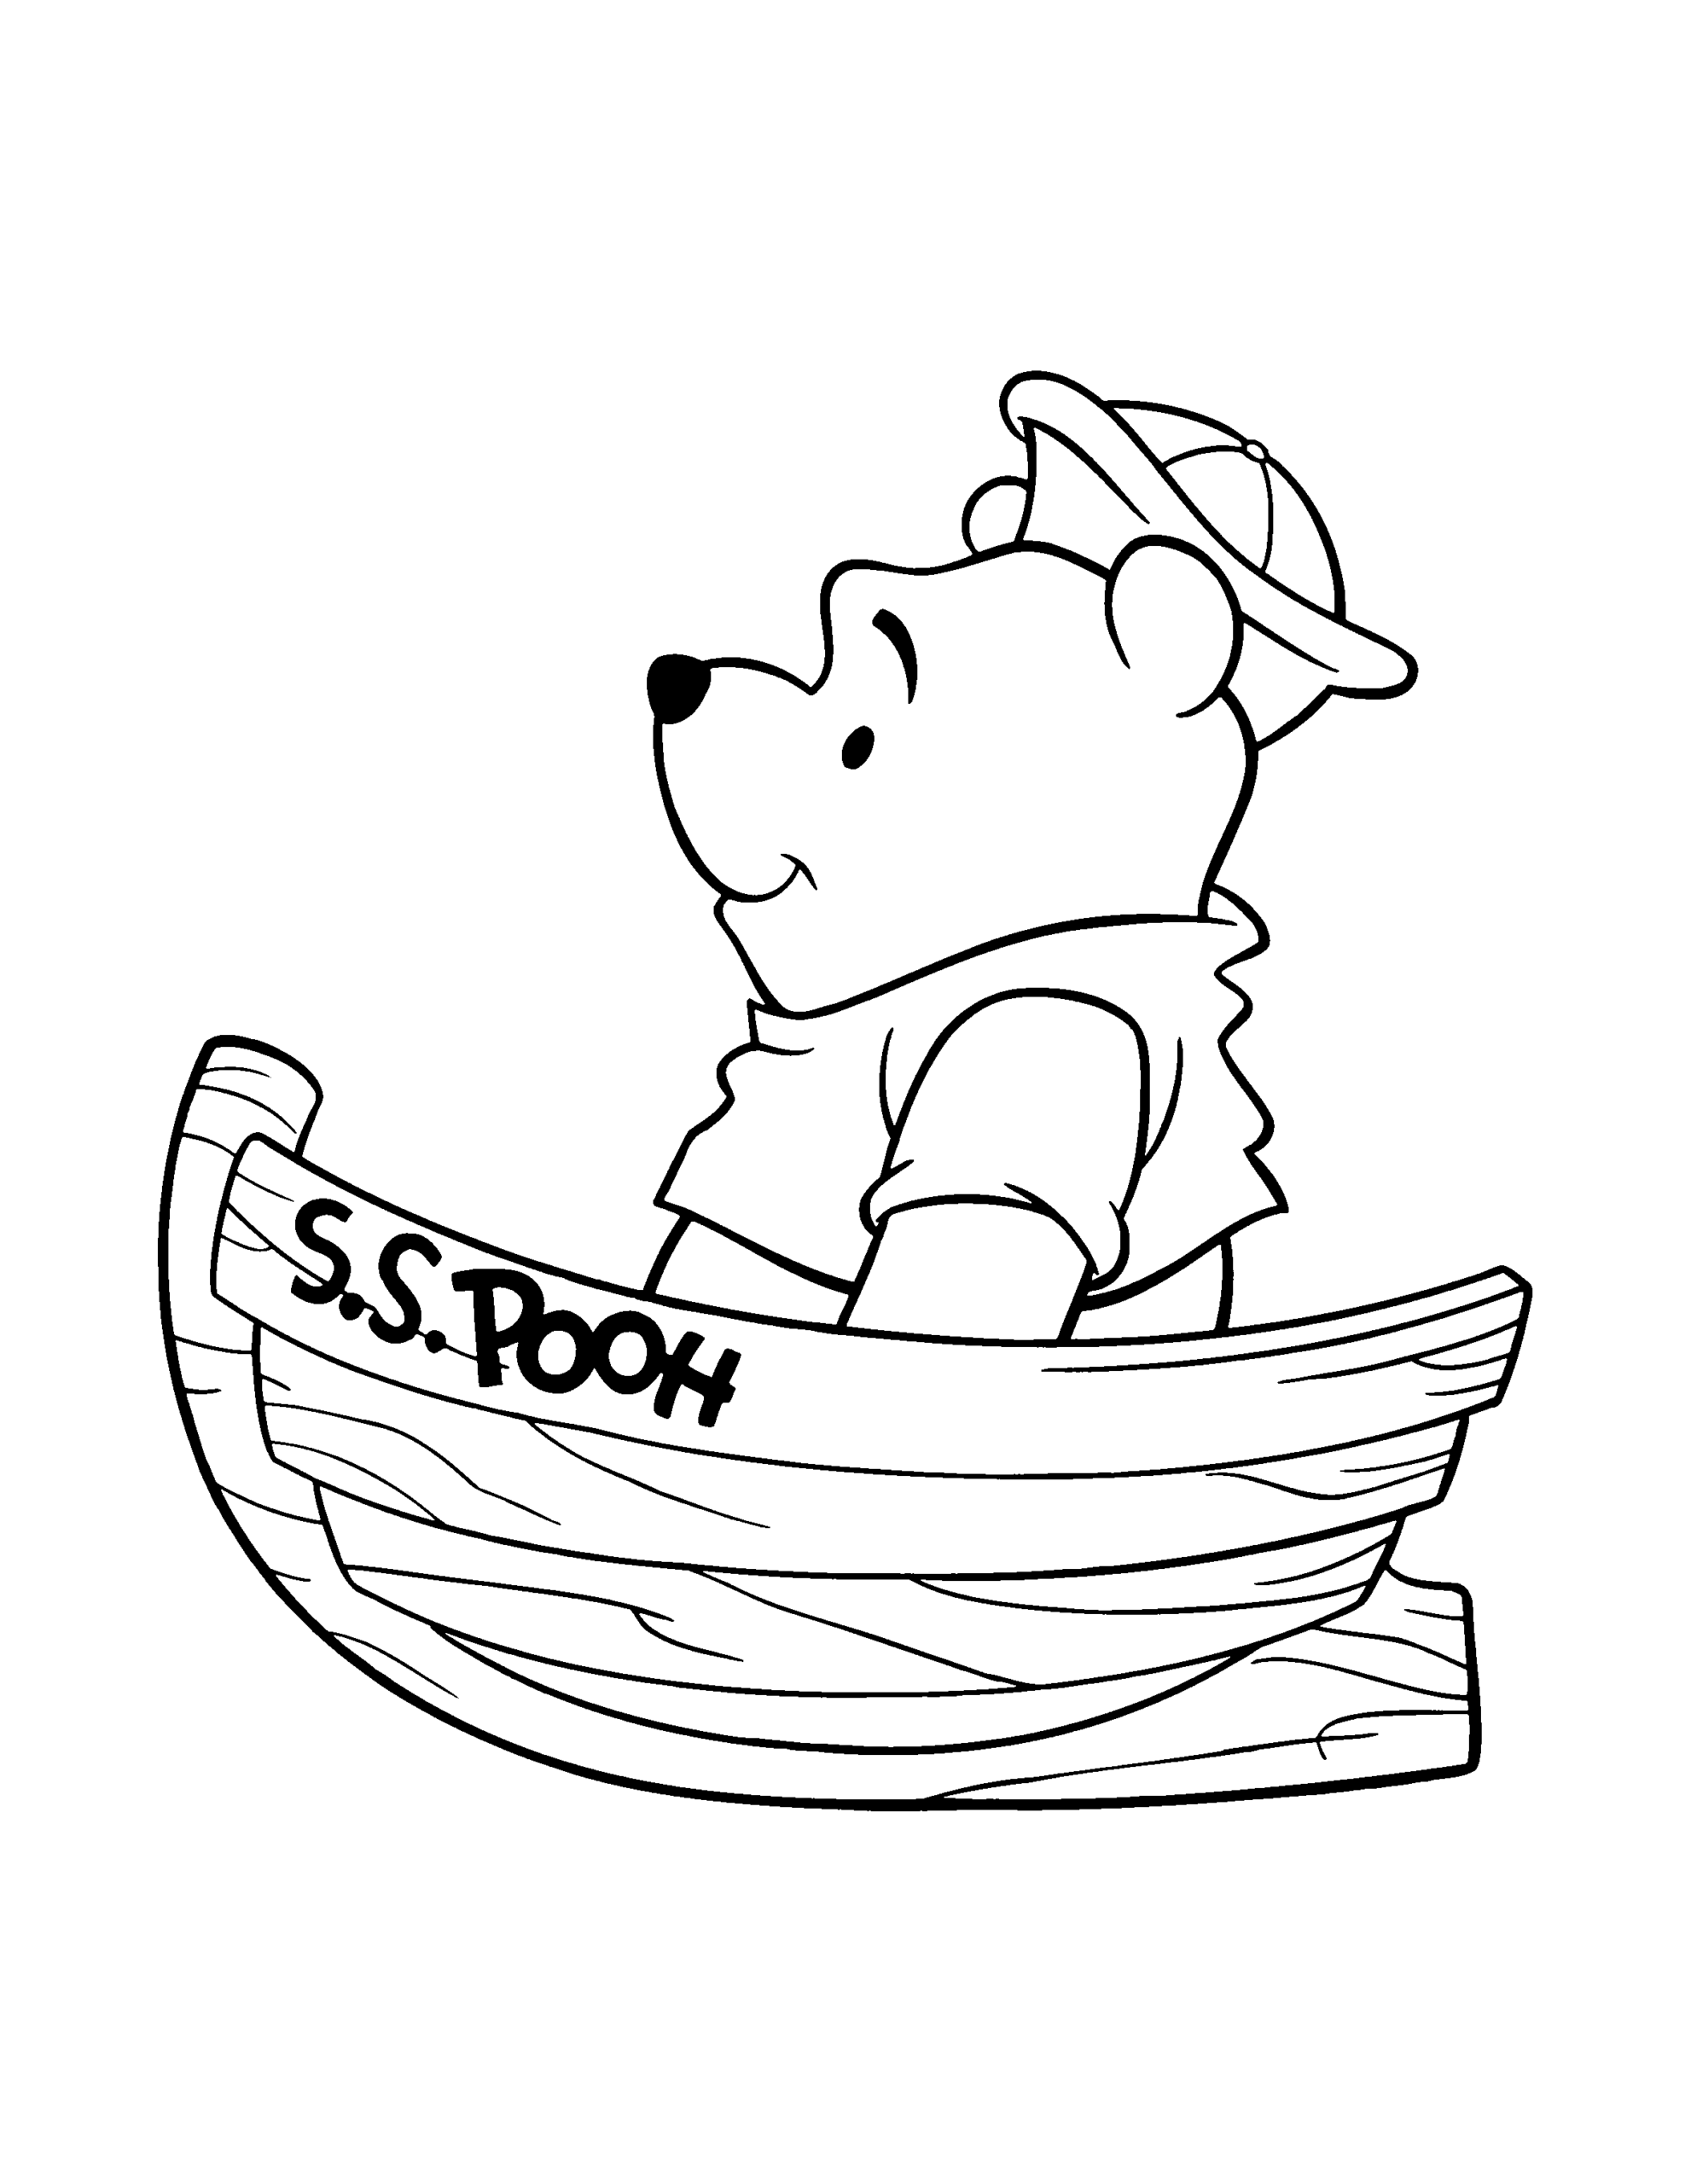 Winnie the Pooh Coloring Pages Cartoons winnie the pooh 96 Printable 2020 7219 Coloring4free